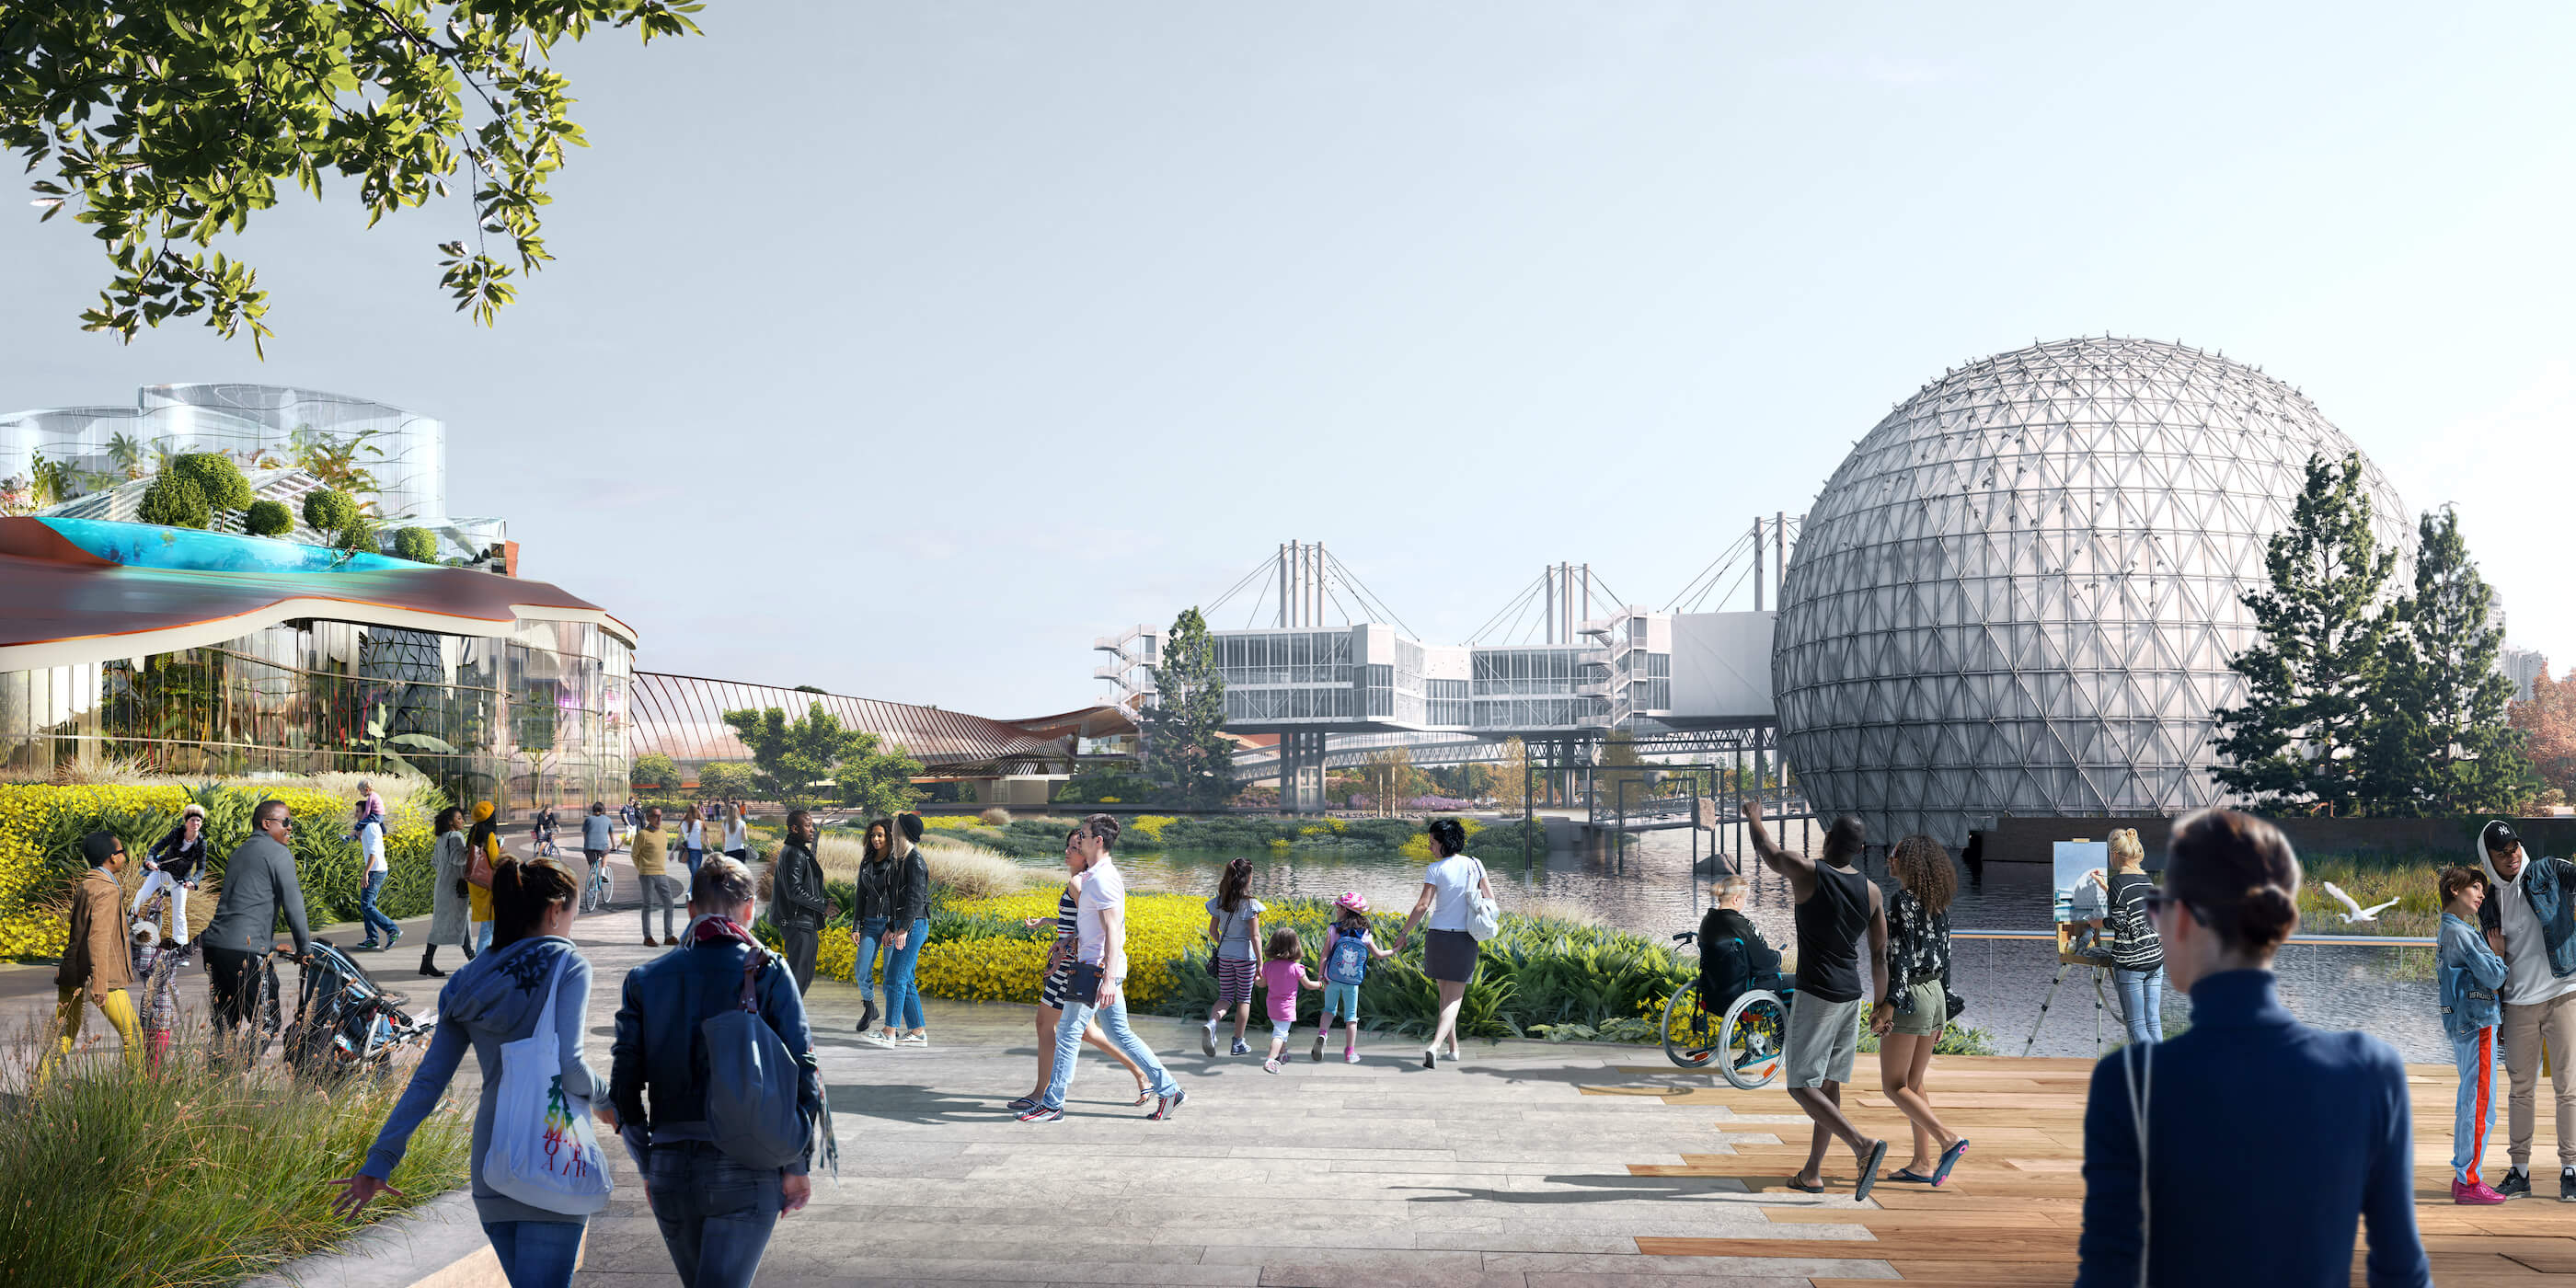 rendering of people walking in a public park with a view of an modernist dome